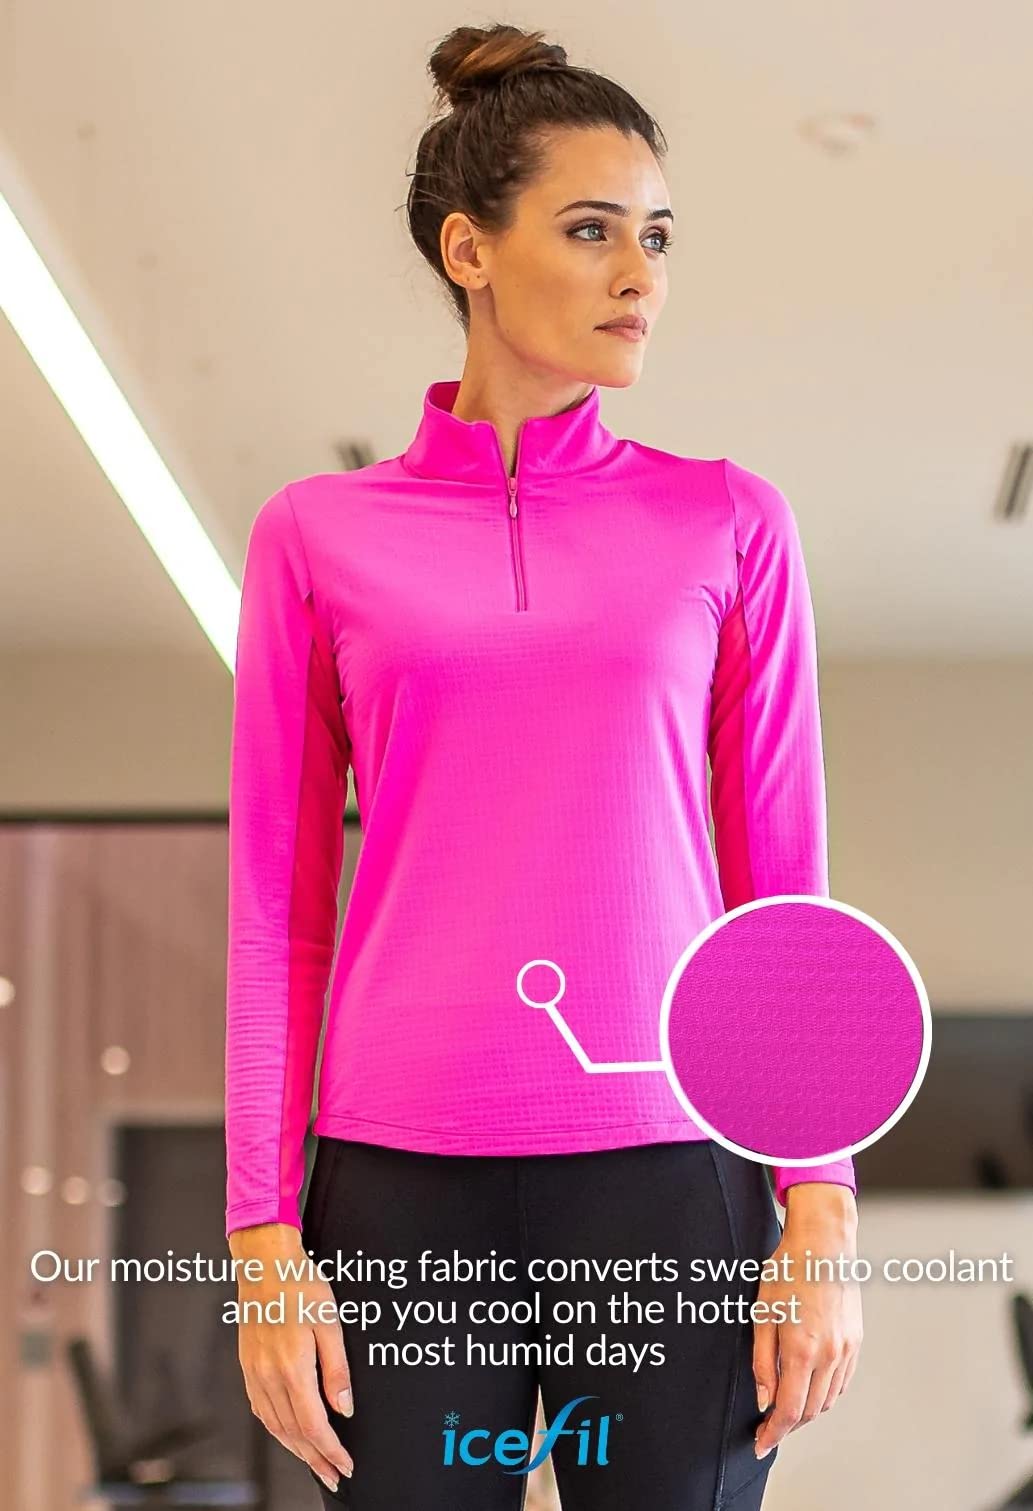 IBKUL Athleisure Wear Sun Protective UPF 50+ Icefil Cooling Tech Long Sleeve Mock Neck Top with Under Arm Mesh 80000 Jade Solid XL